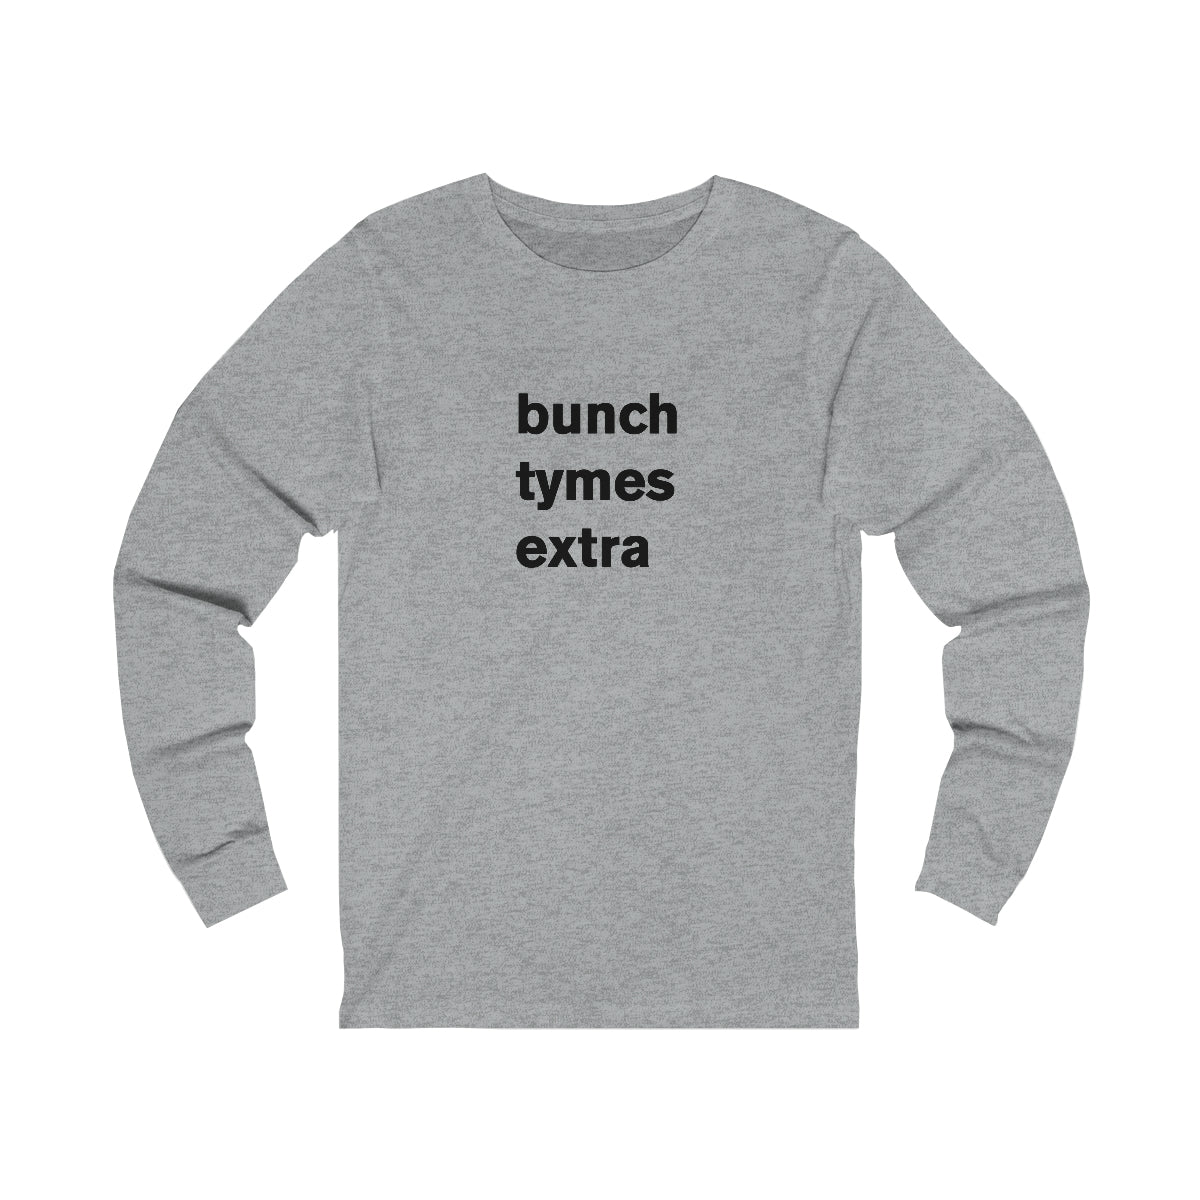 bunch tymes extra - long sleeve